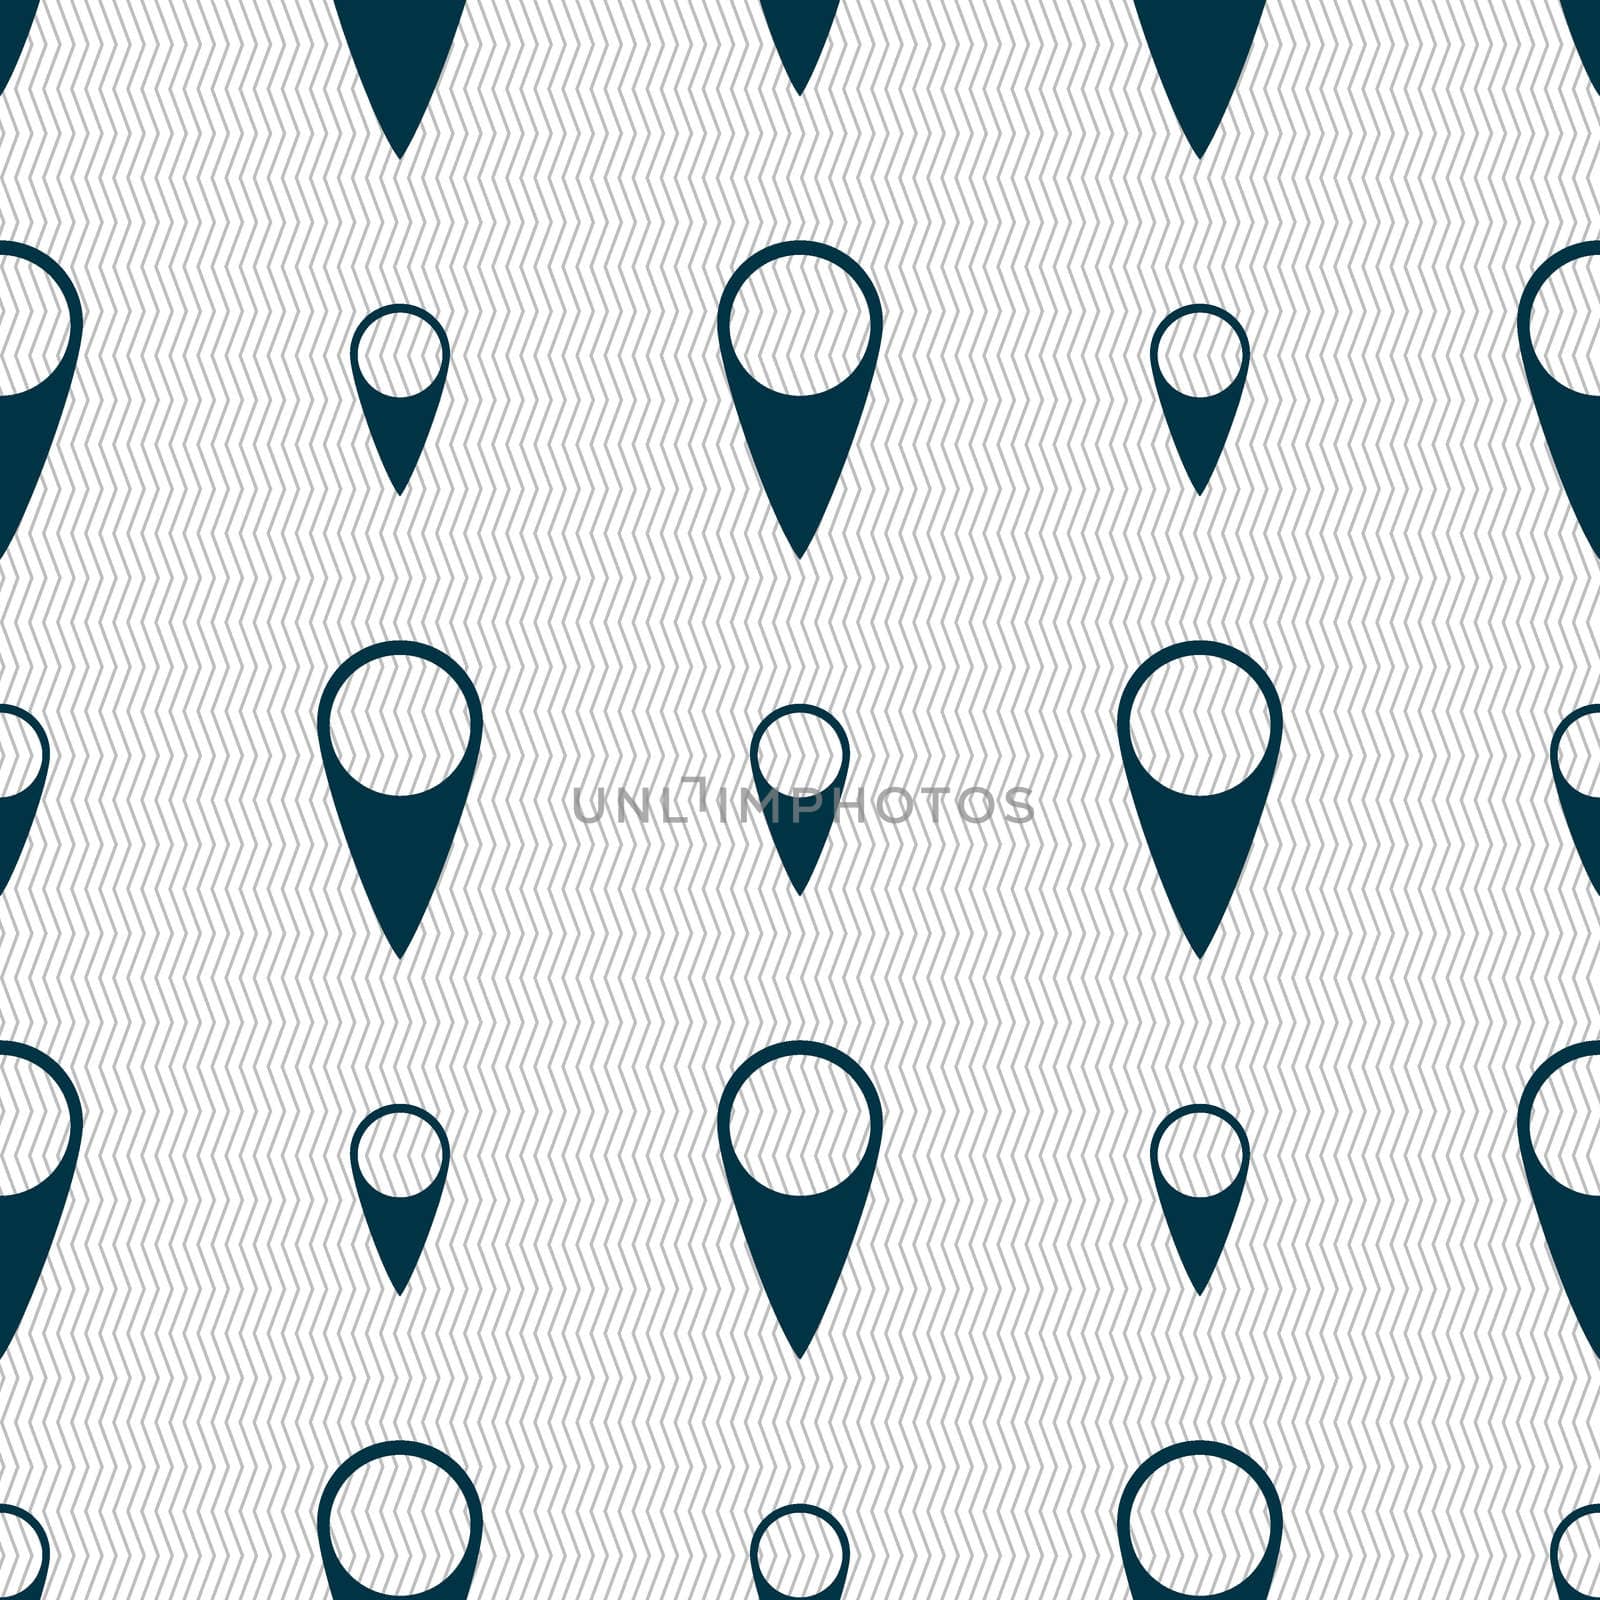 Map pointer icon. GPS location symbol. Seamless abstract background with geometric shapes. illustration